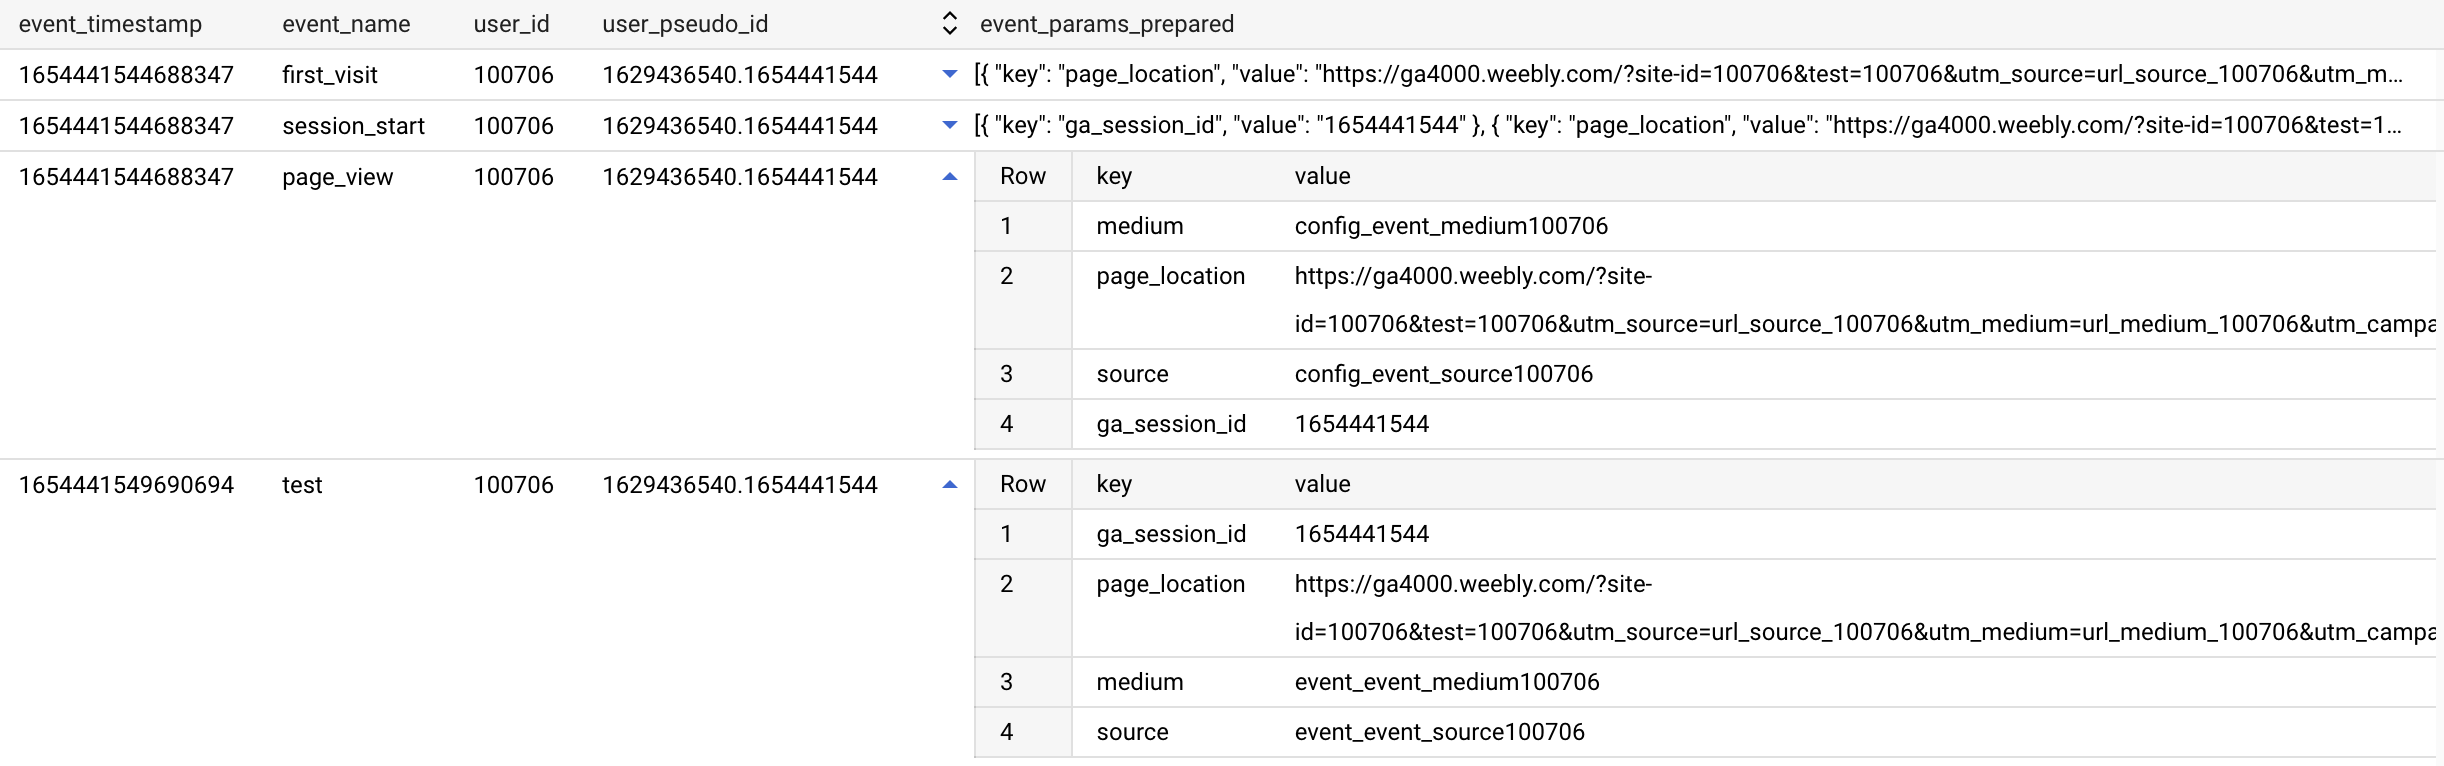 Results in BigQuery